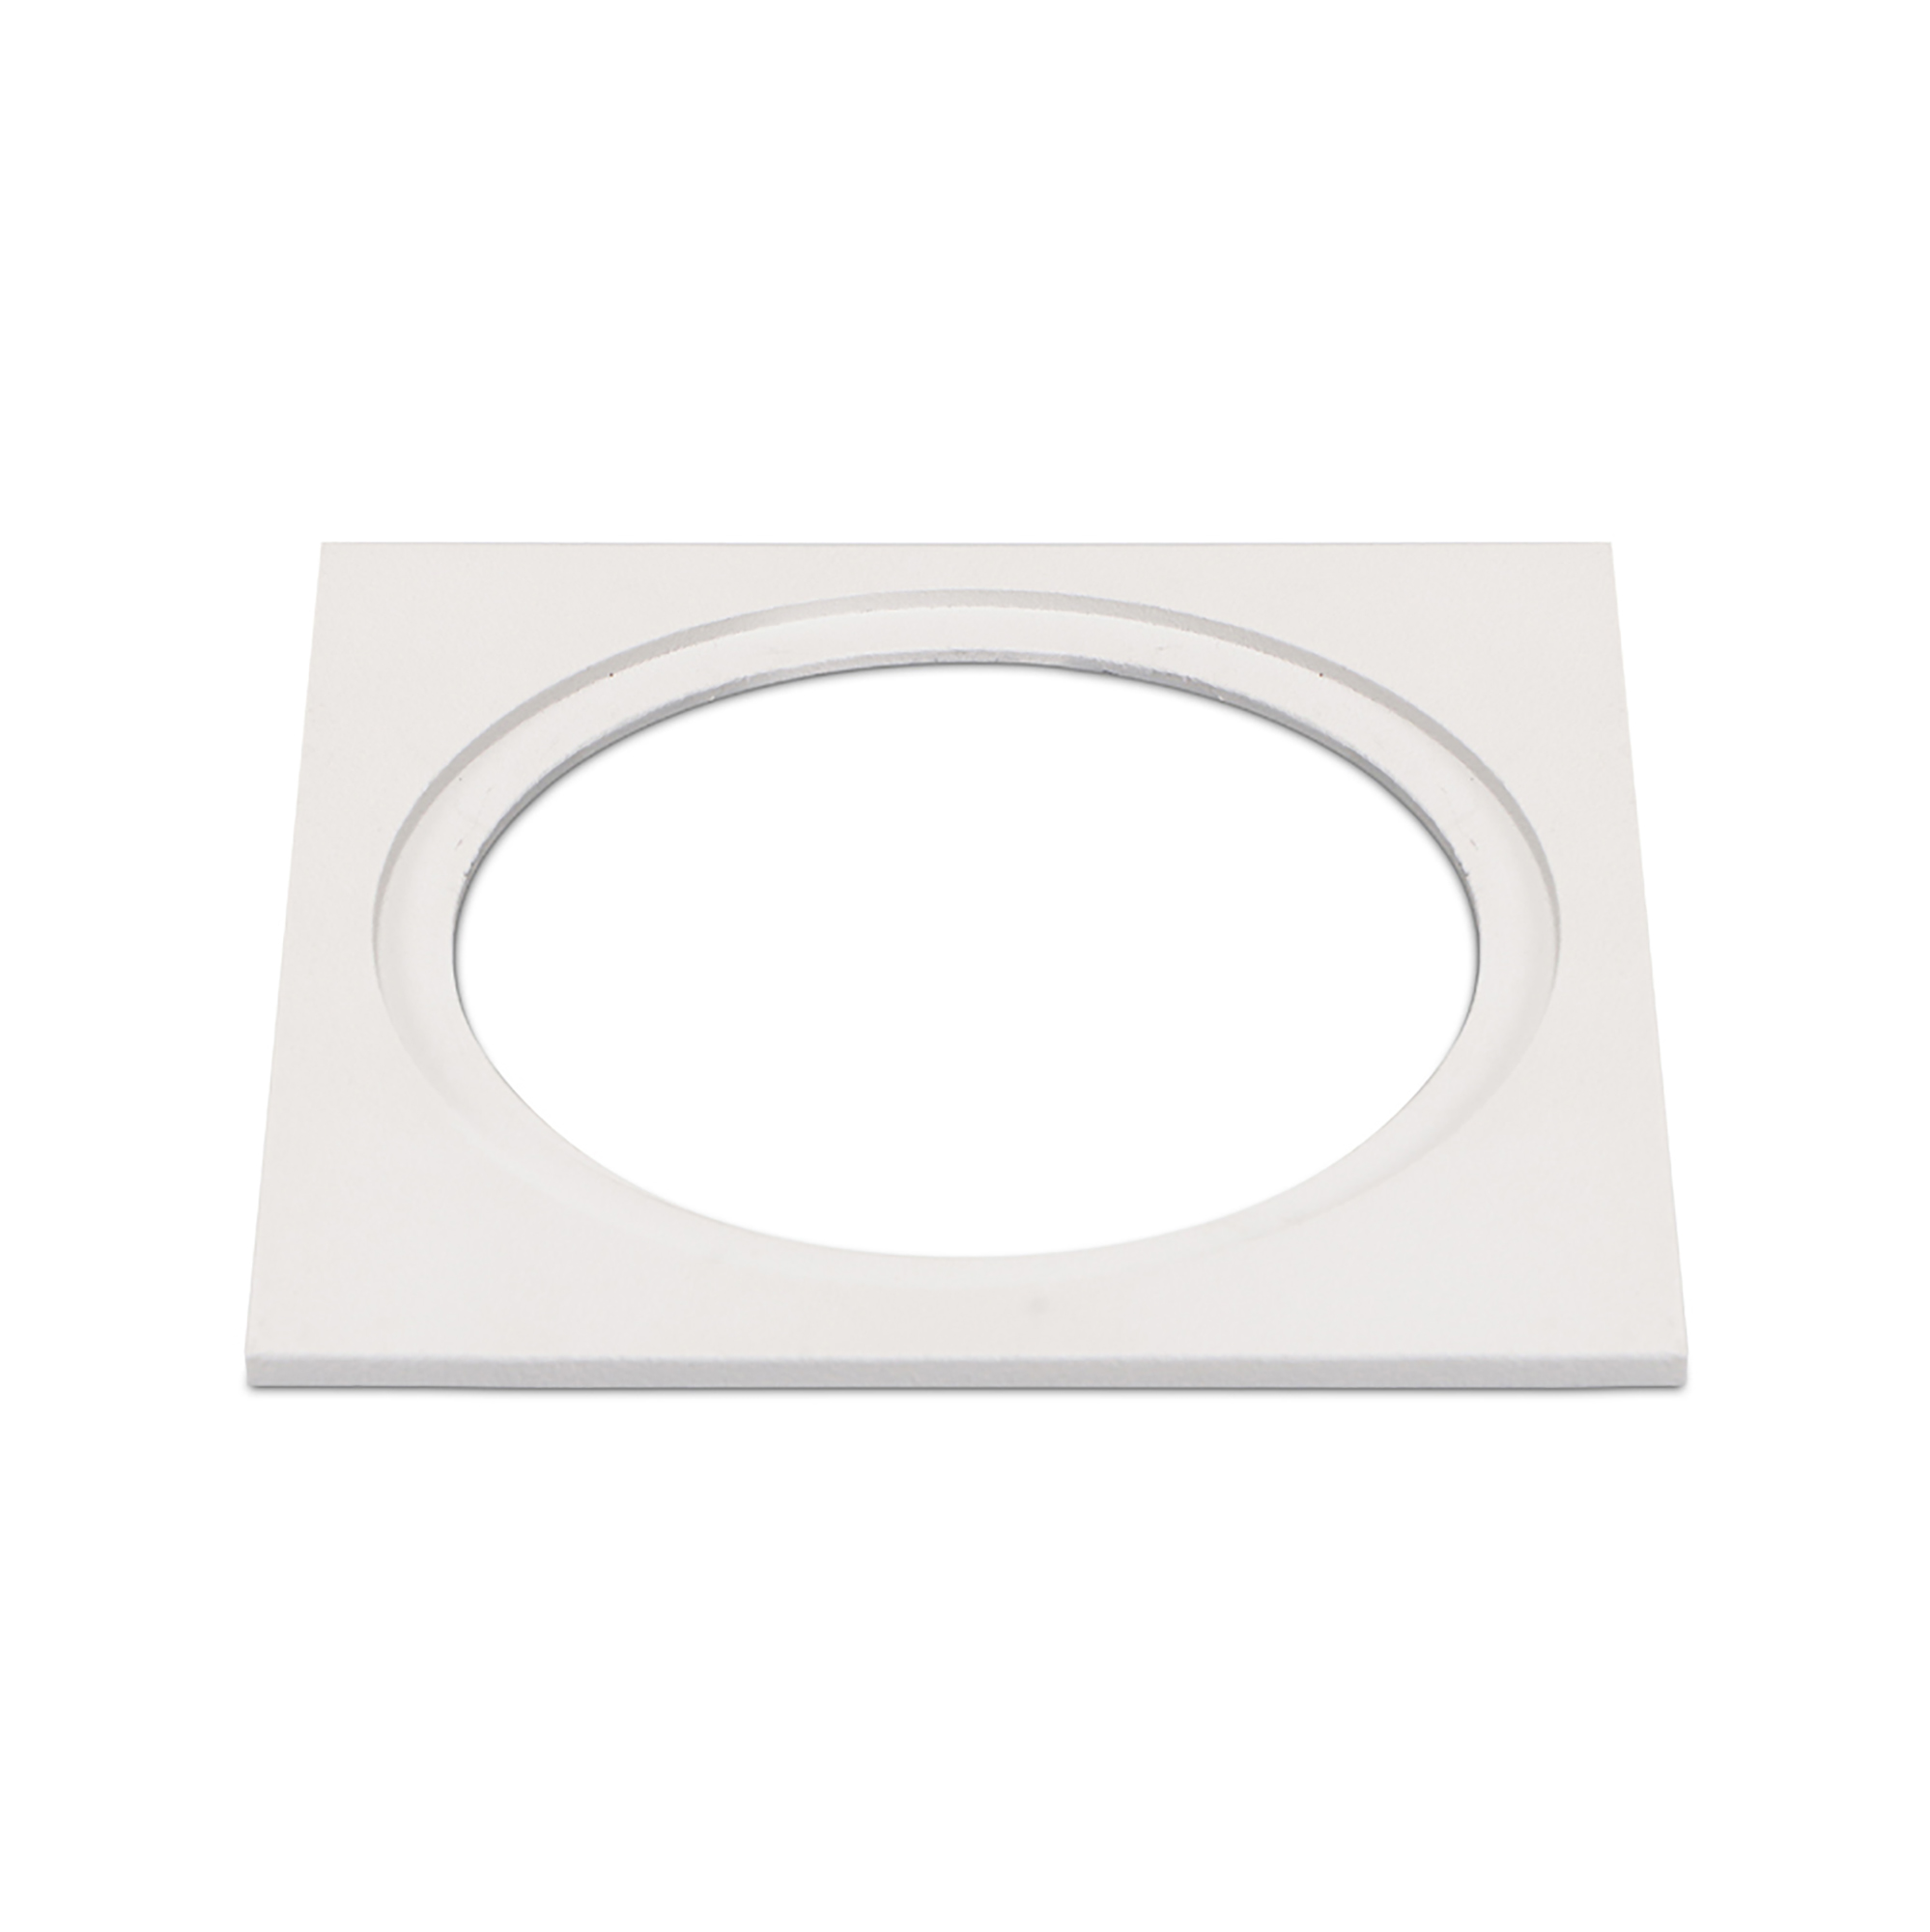 DX210045  Bania S 90x90mm White Square Frame Suitable For Bania, Bania A and Bazi Downlight